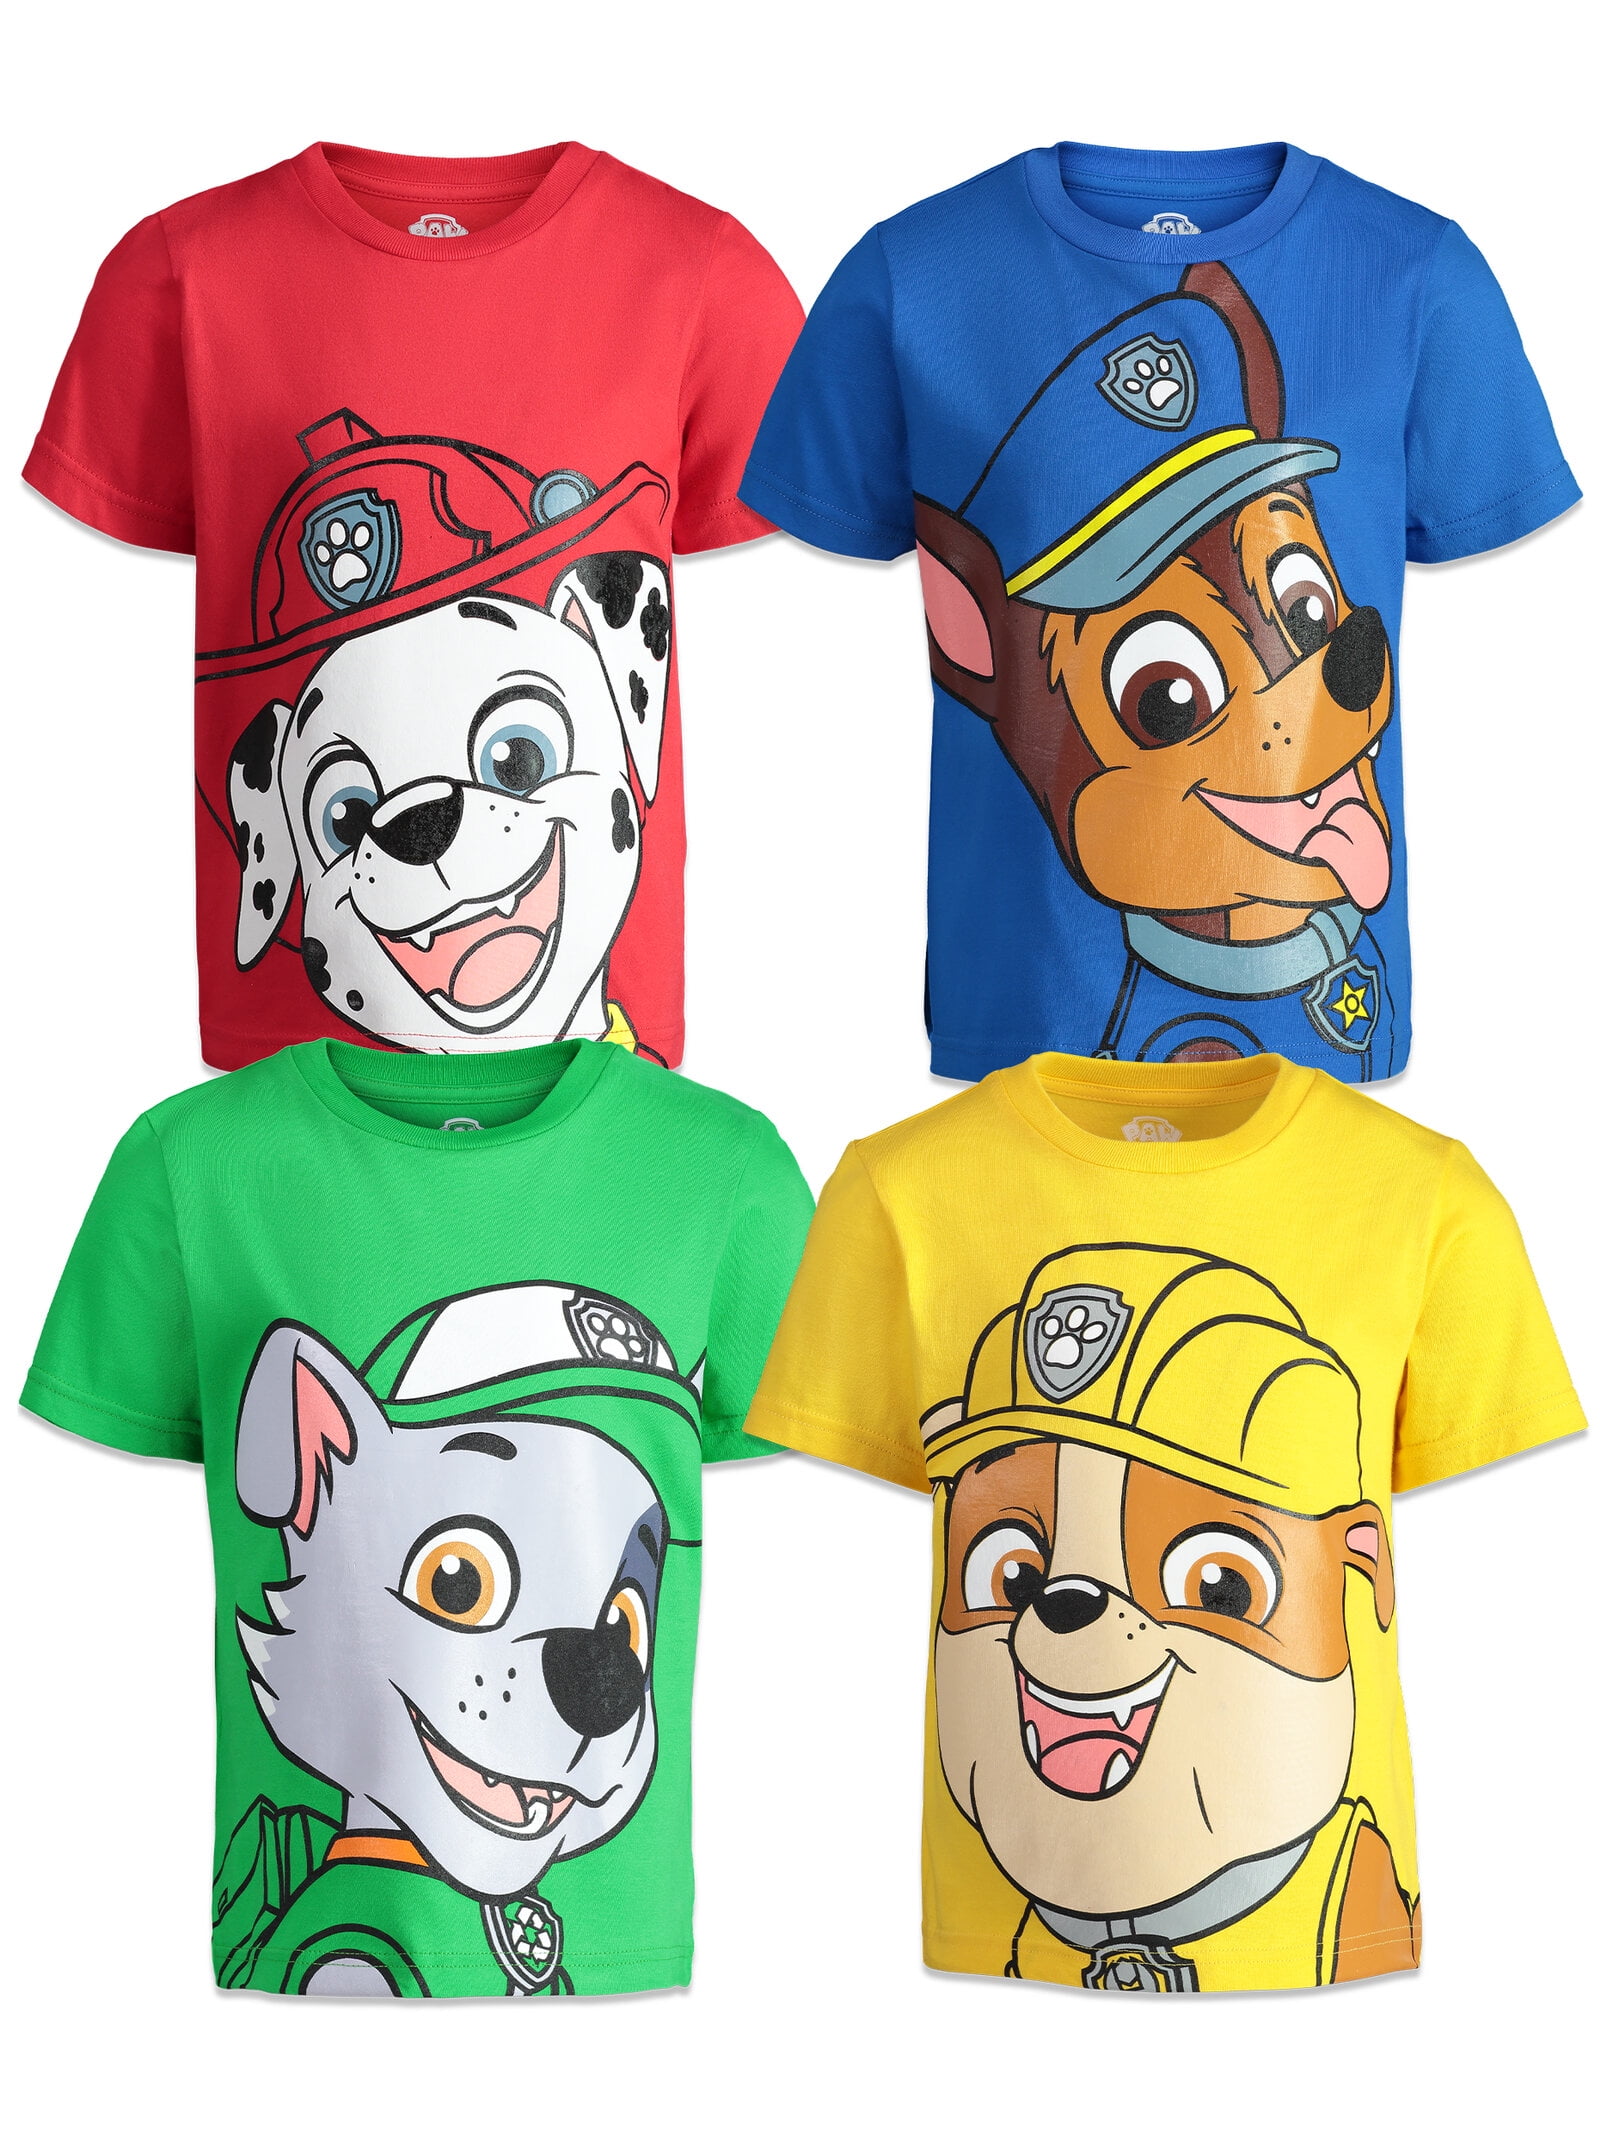 Filles officiel Paw Patrol All in One micropolaire Sleepsuit Ange Âge 1-5 Ans 